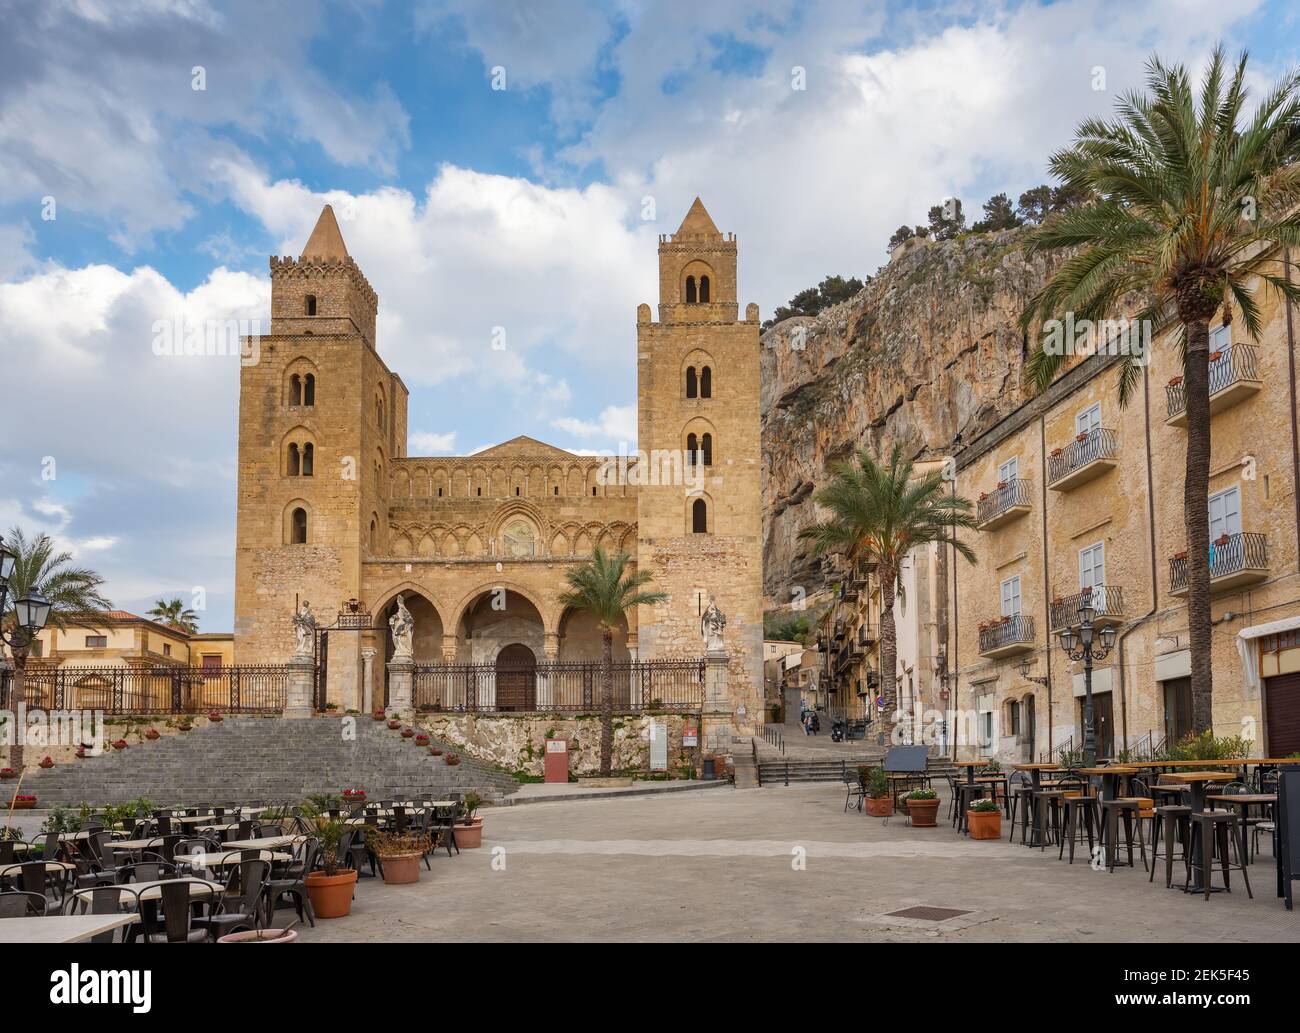 Cathedral Basilica of Cefalu at square Piazza del Duomo in the old town of Cefalu, Sicily Stock Photo